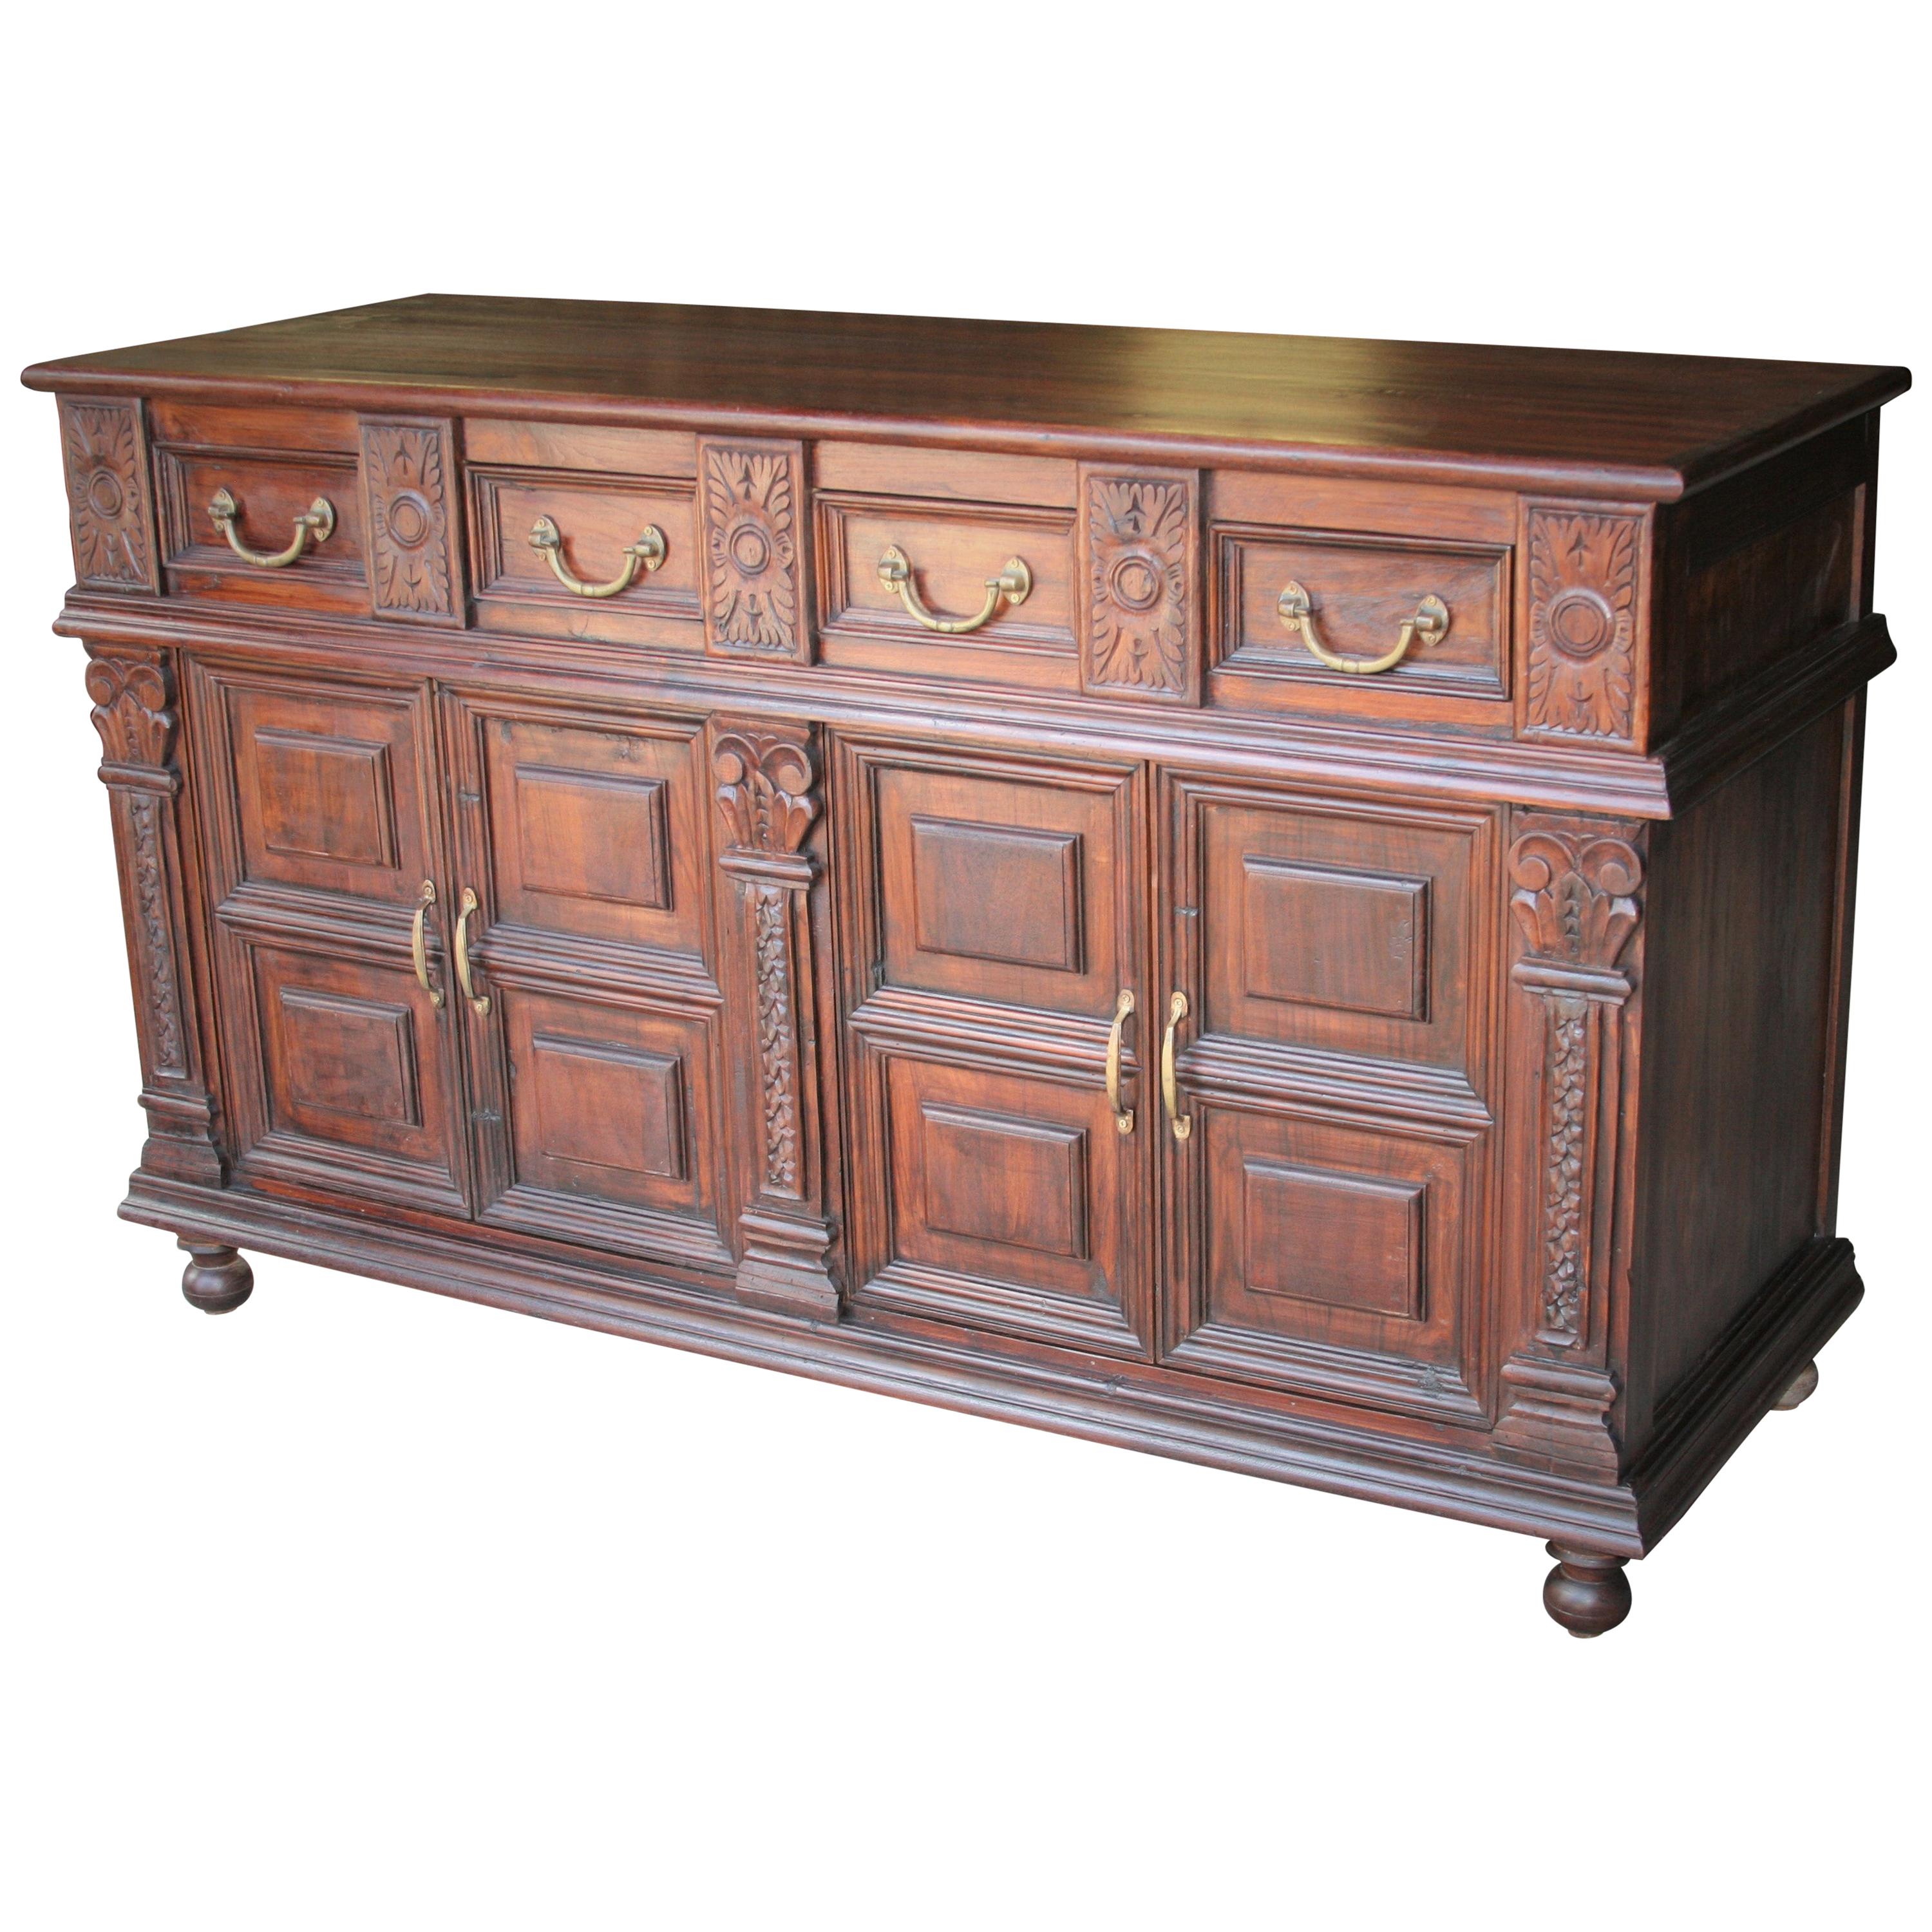 Solid Teak Wood Early 20th Century Superbly Crafted French Colonial Credenza For Sale